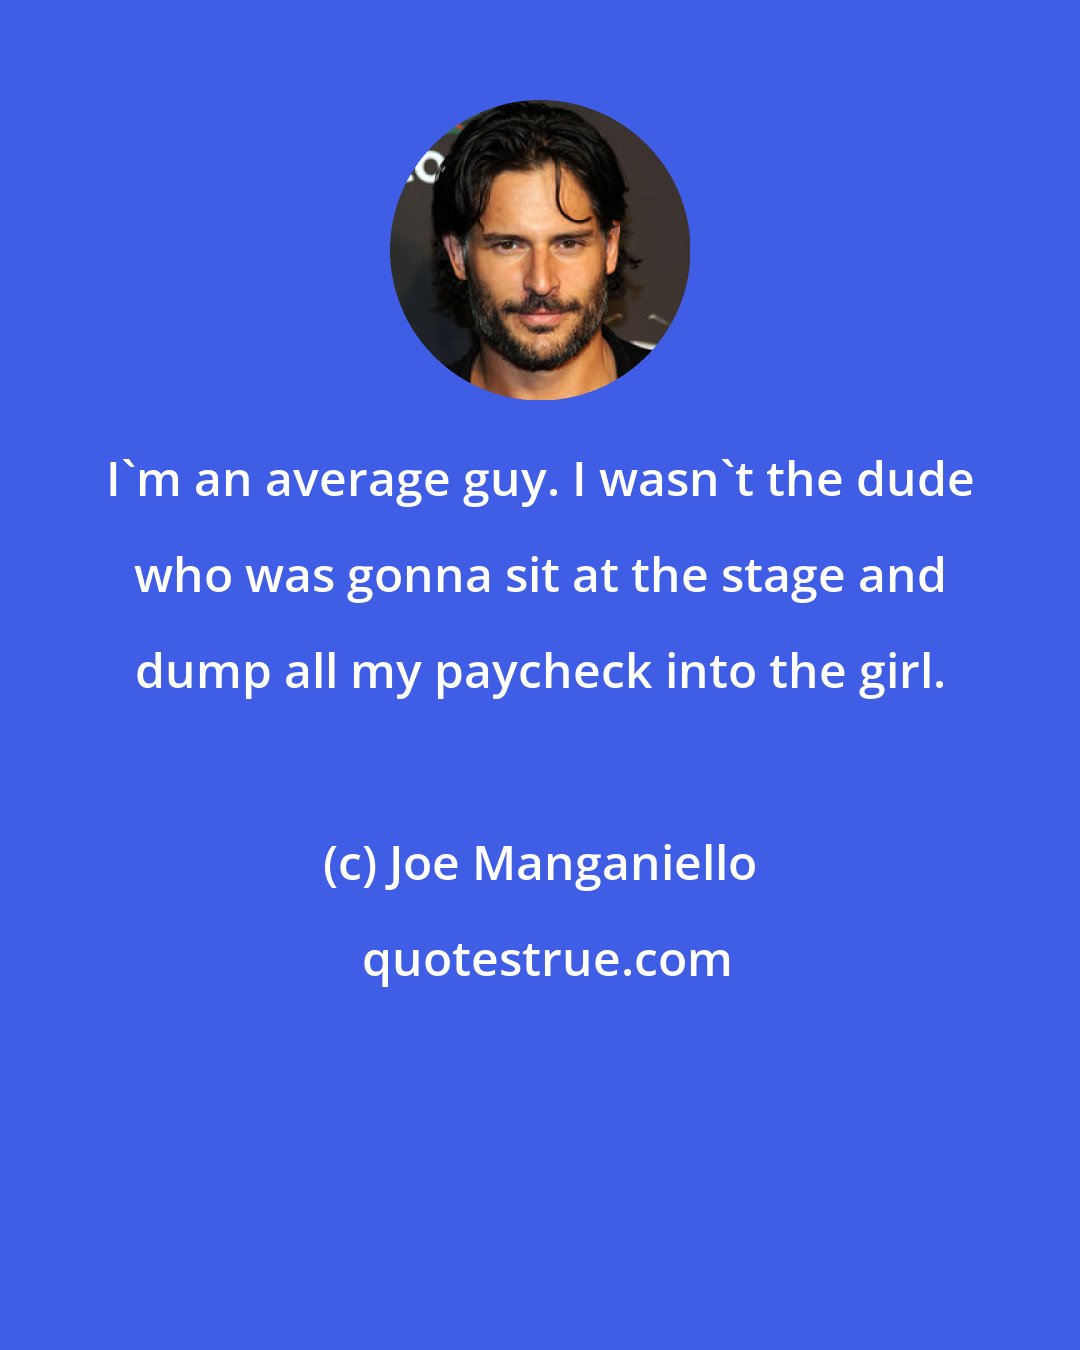 Joe Manganiello: I'm an average guy. I wasn't the dude who was gonna sit at the stage and dump all my paycheck into the girl.